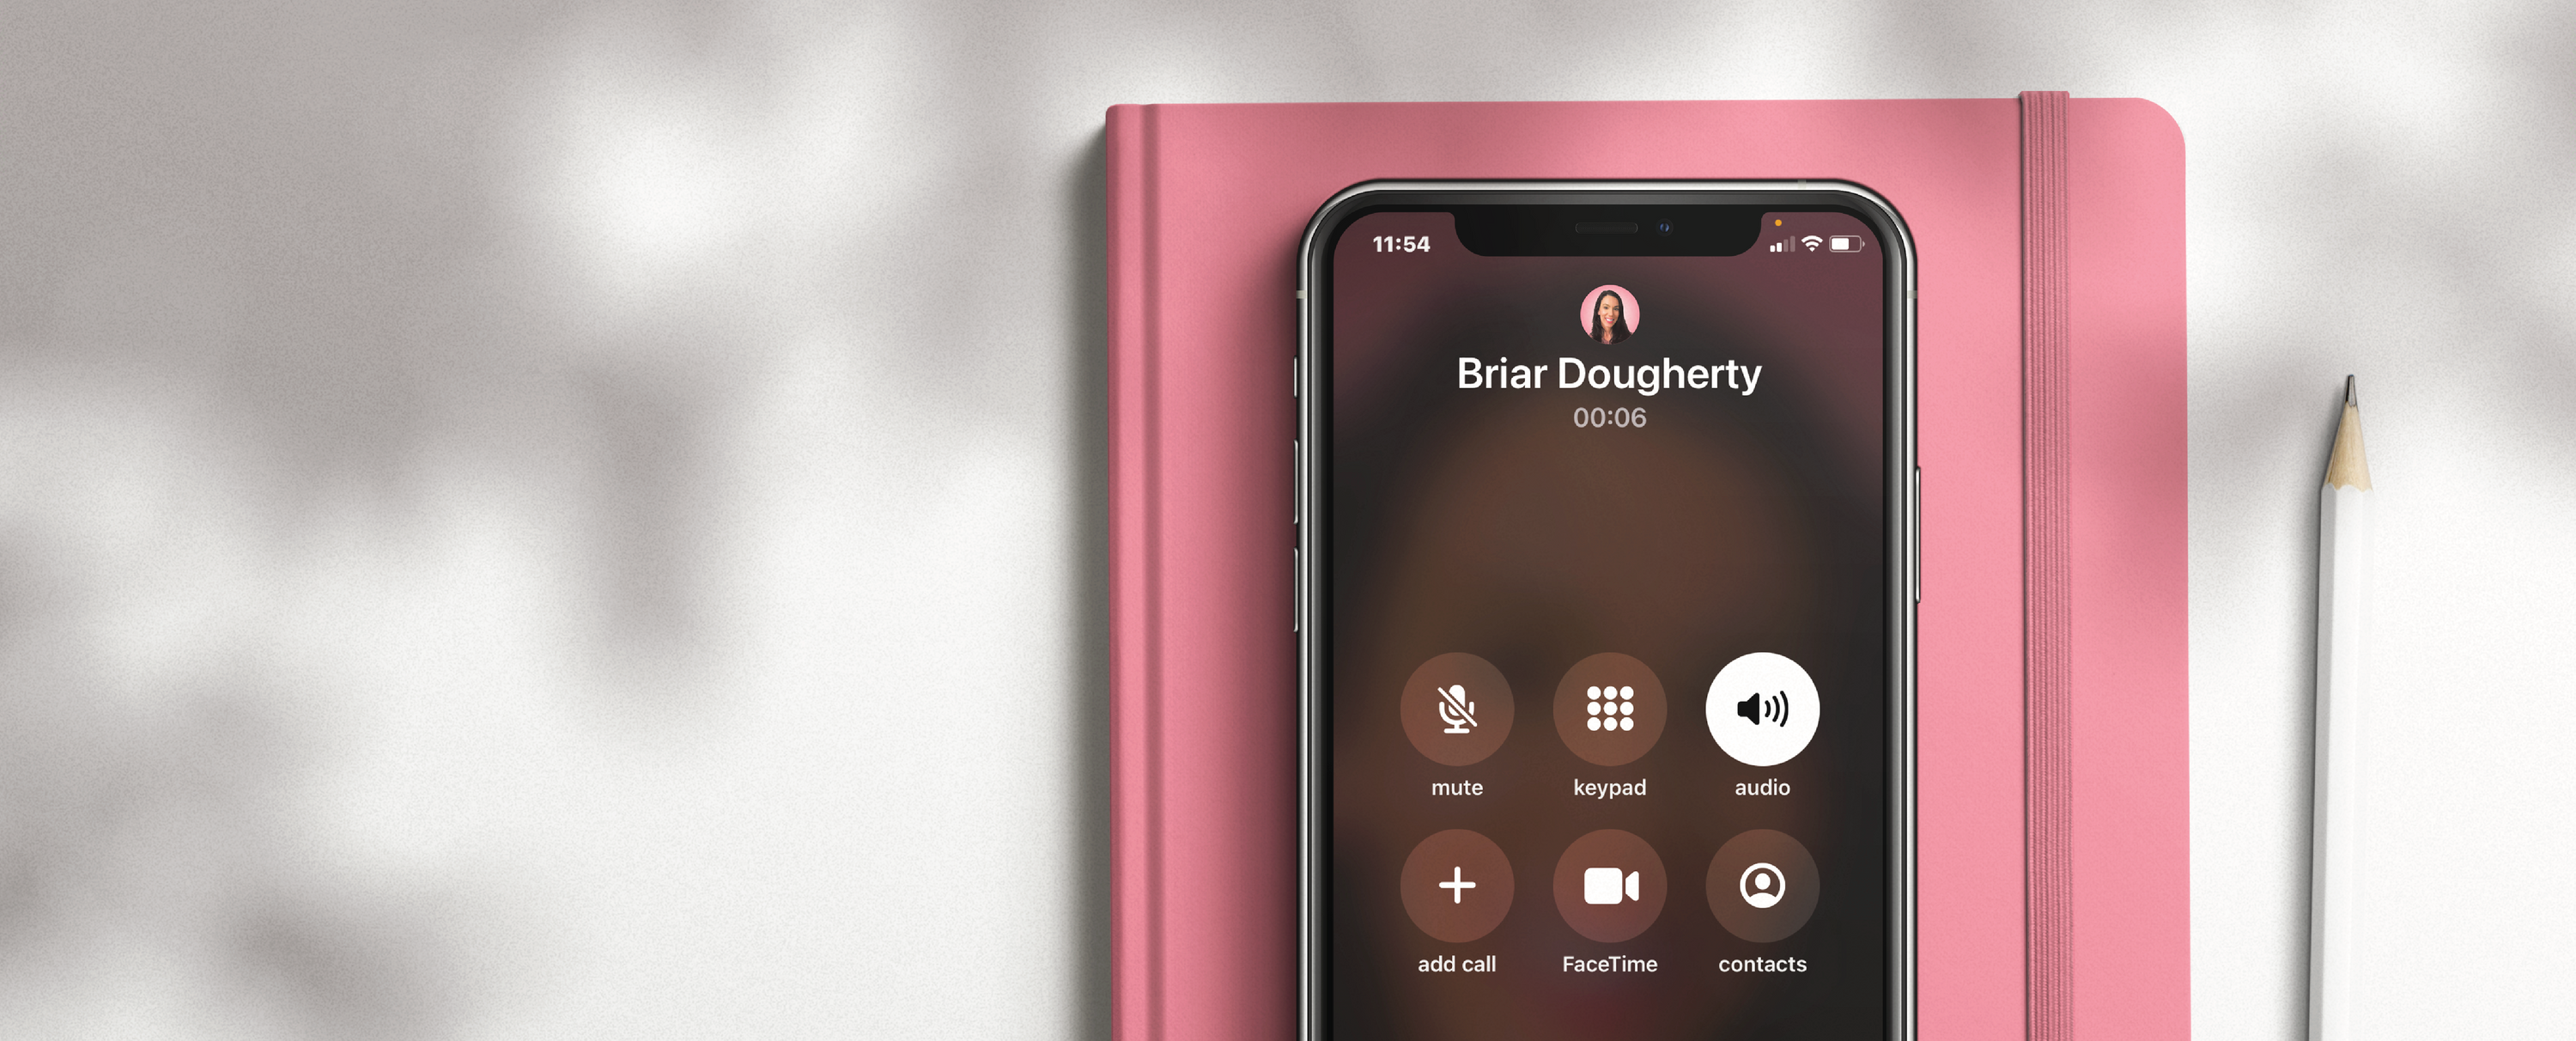 An Iphone on a pink notebook, showing a phone call with CEO Briar.